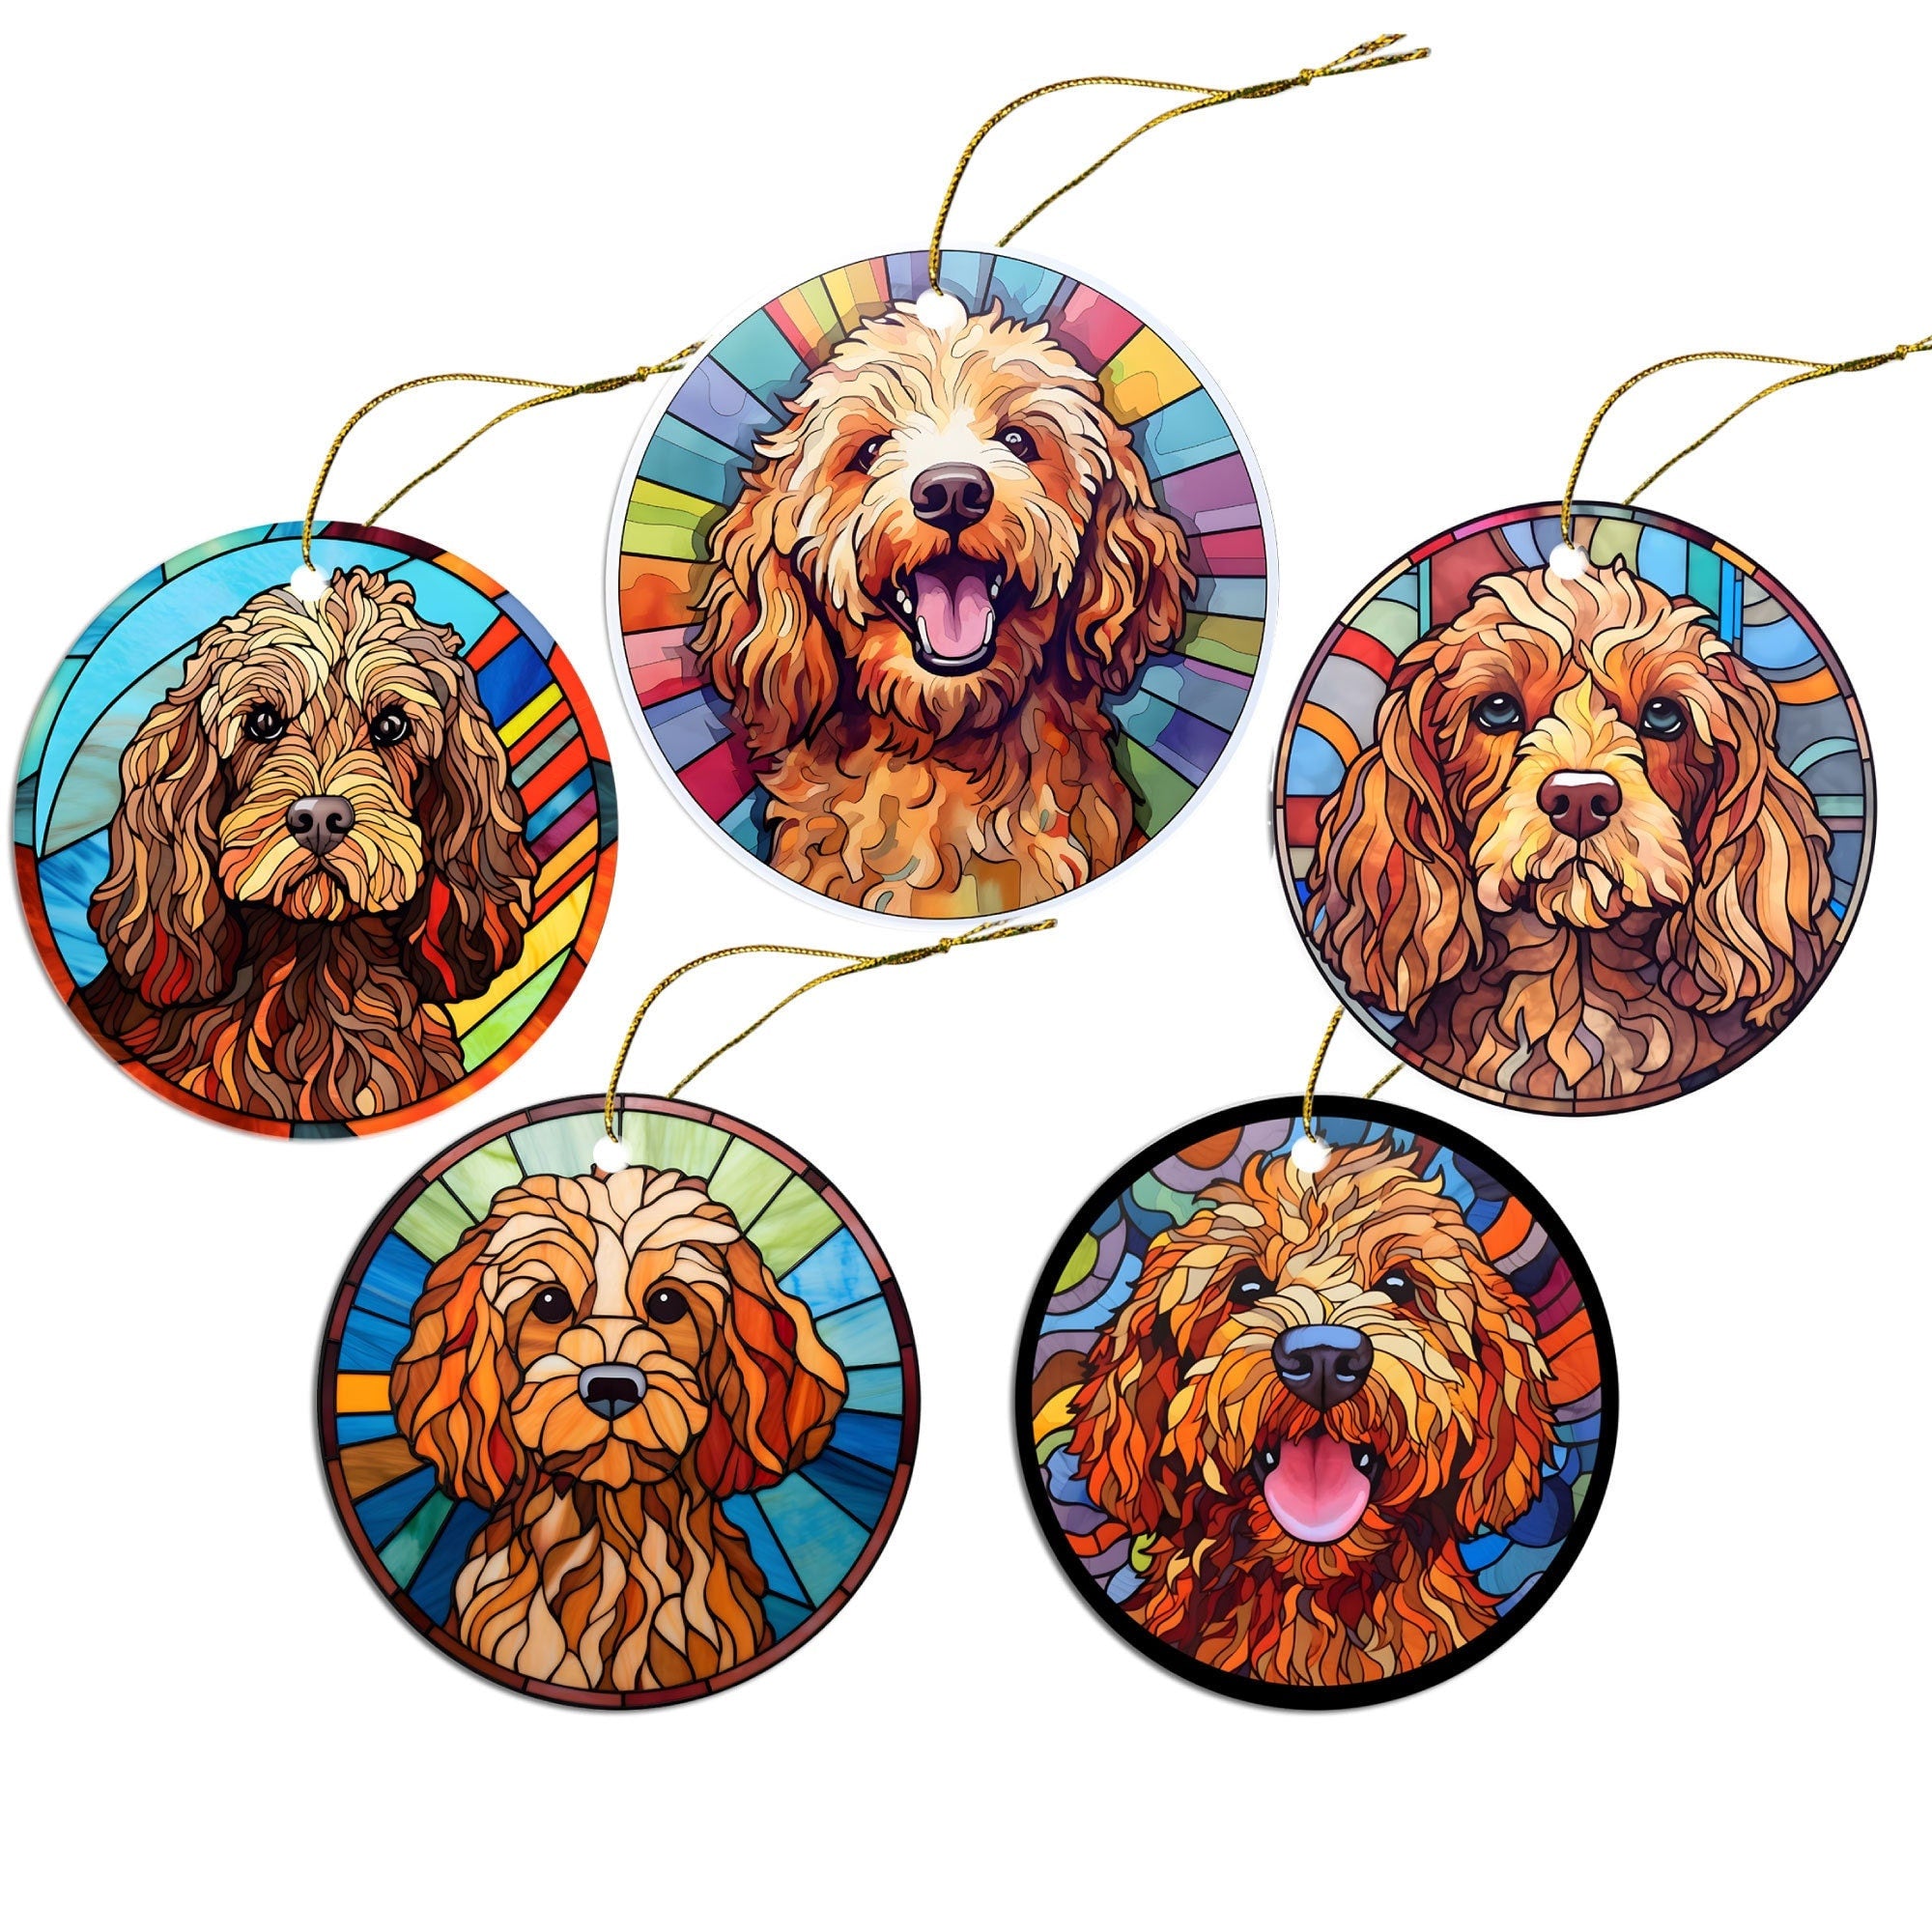 Dog Breed Christmas Ornament Stained Glass Style, "Cockapoo"